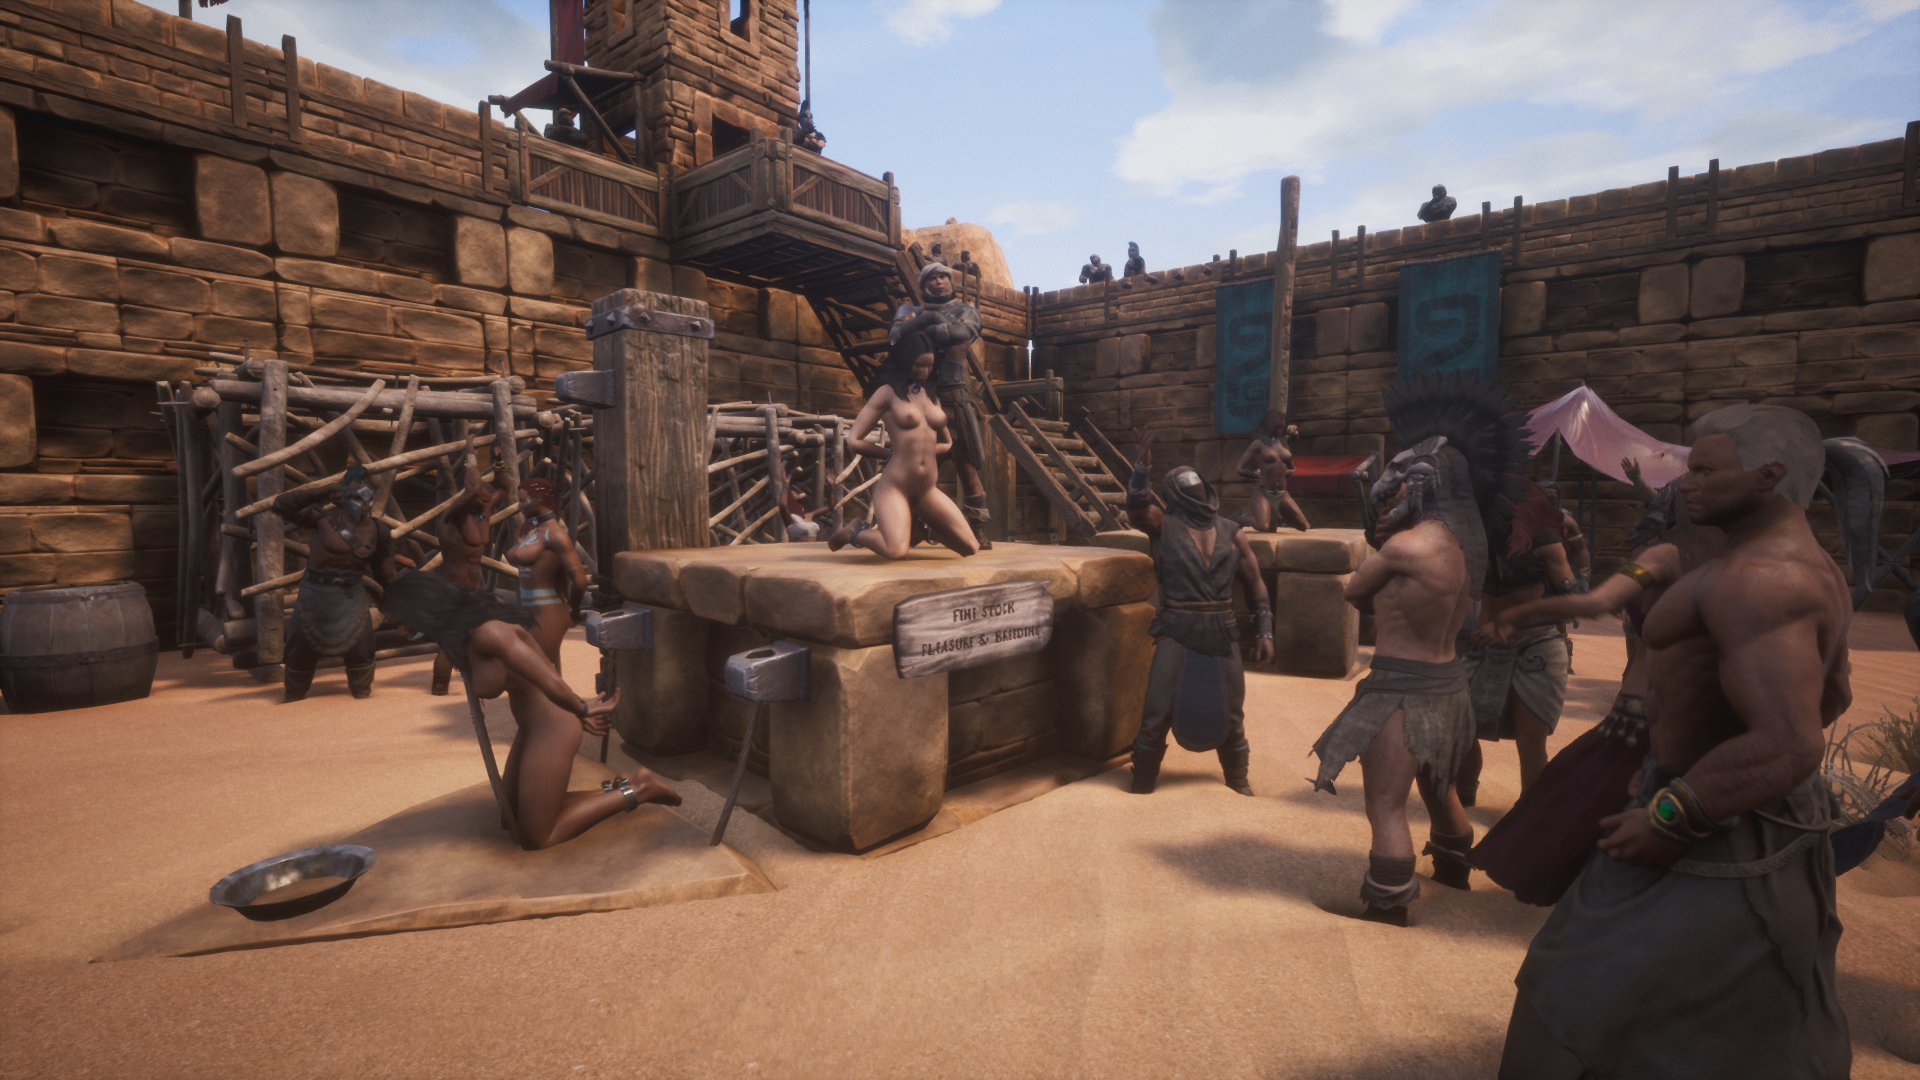 Outdated CE Conan Exiles Outdated Page 3Gaming. 